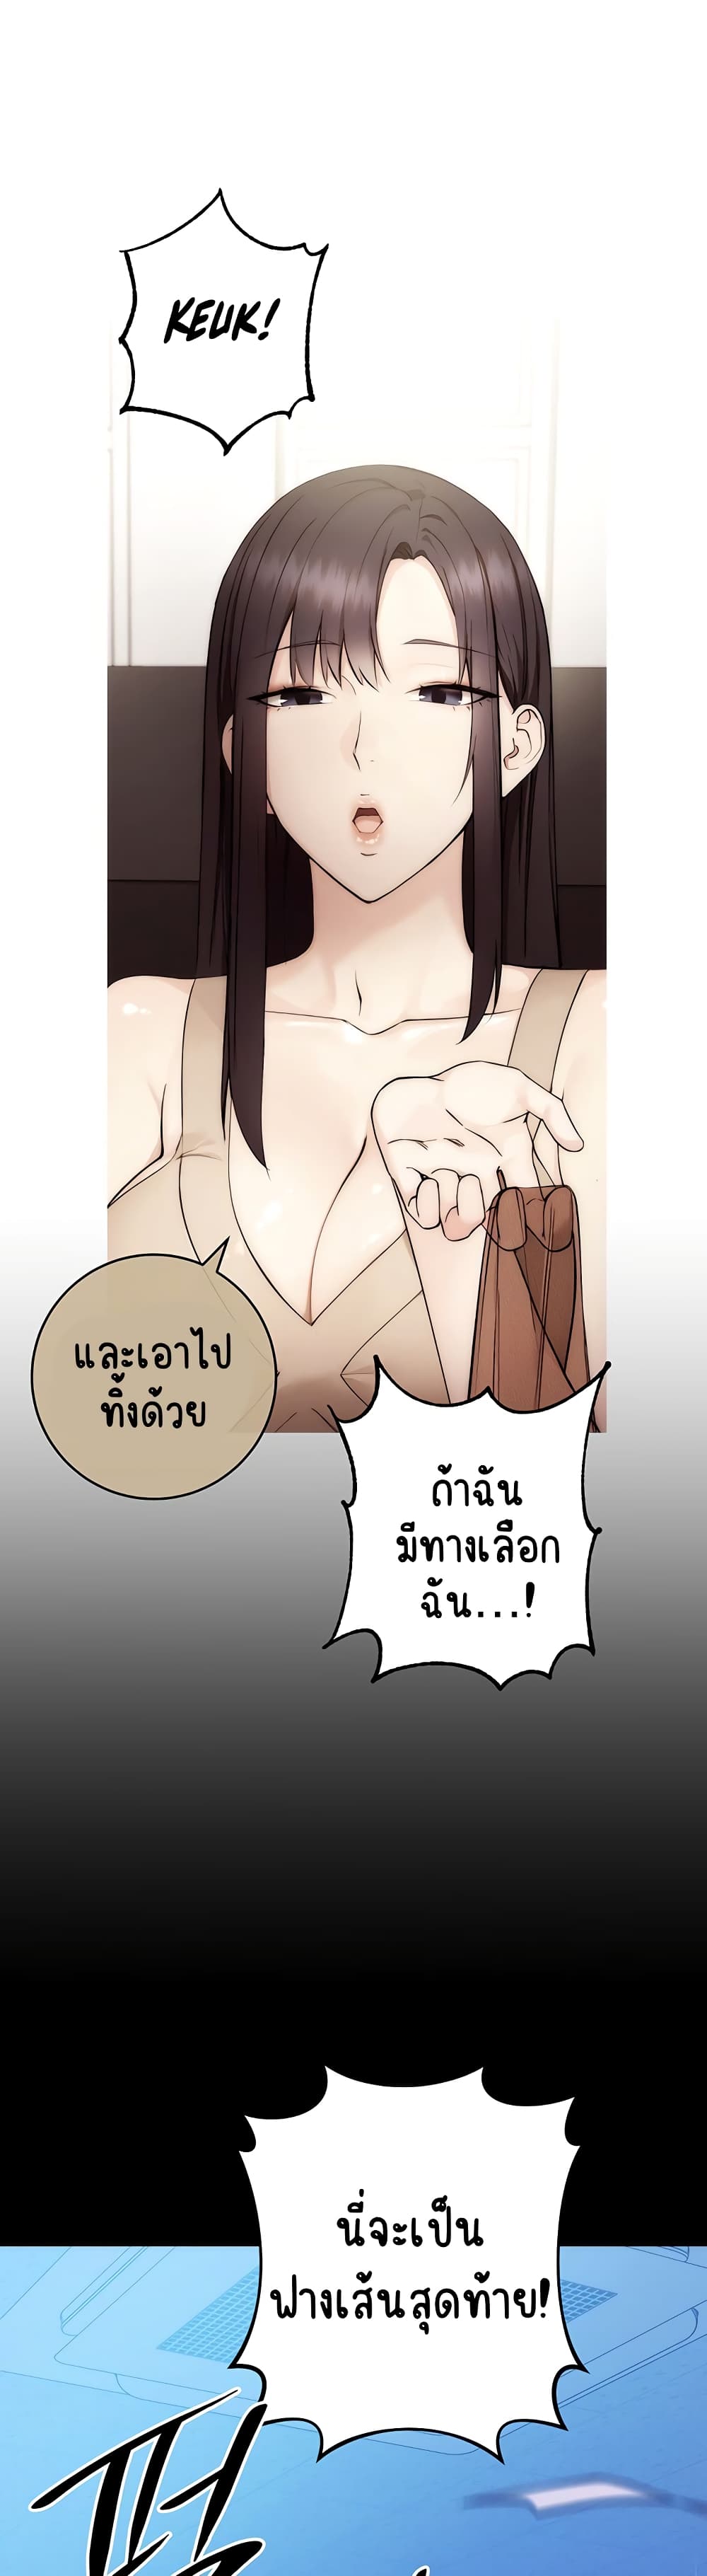 Outsider: The Invisible Man ตอนที่ 1 ภาพ 38